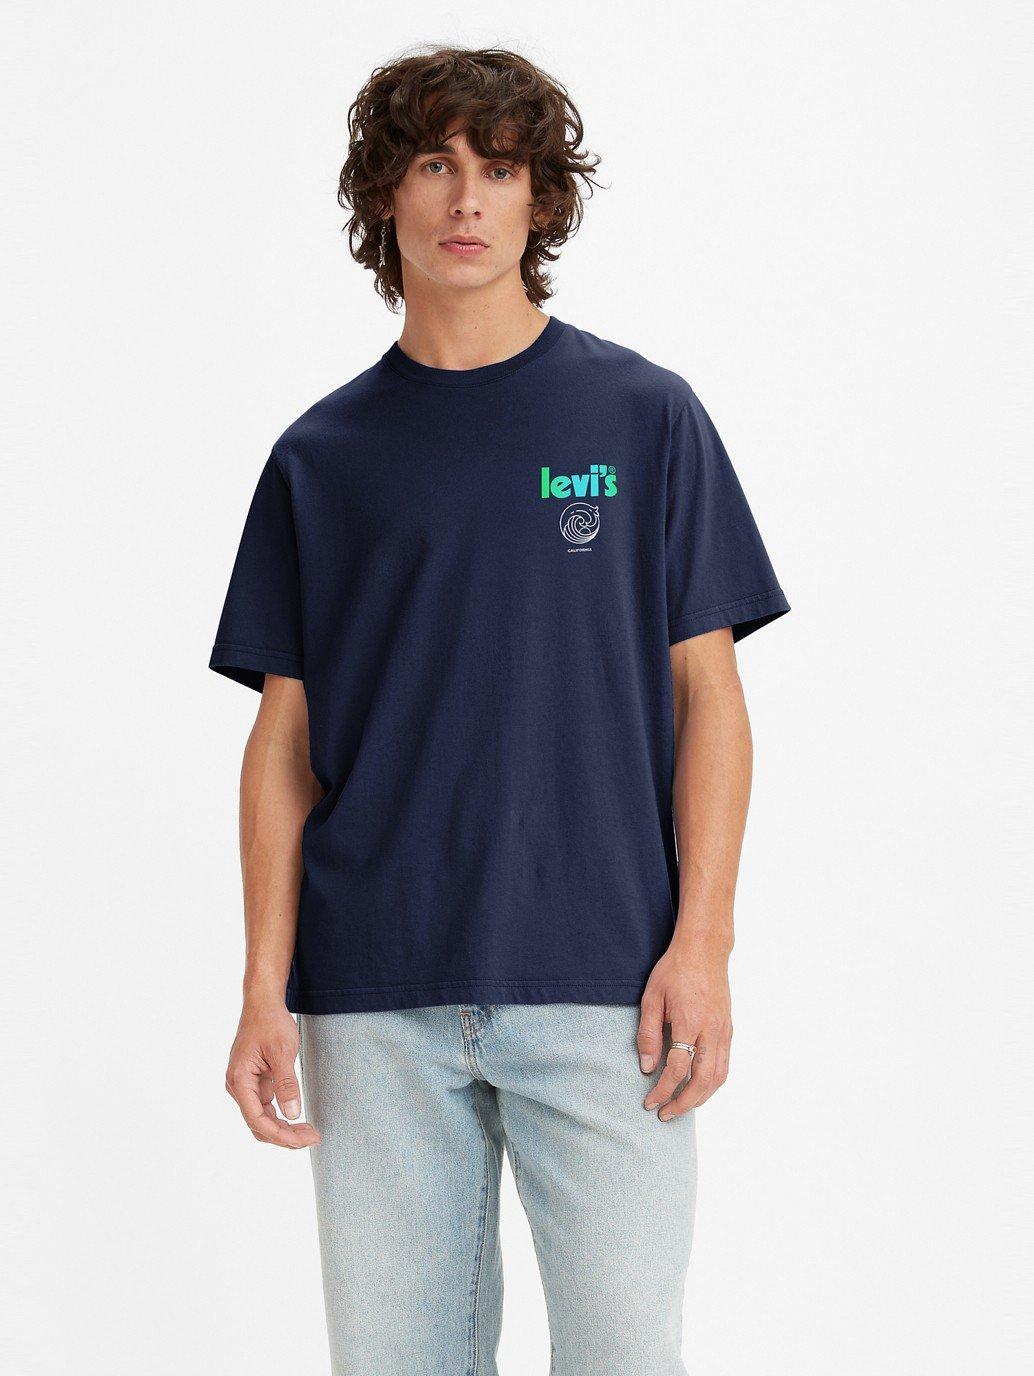 Buy Levi's® Men's Relaxed Fit Short Sleeve Graphic T-Shirt | Levi's  Official Online Store SG